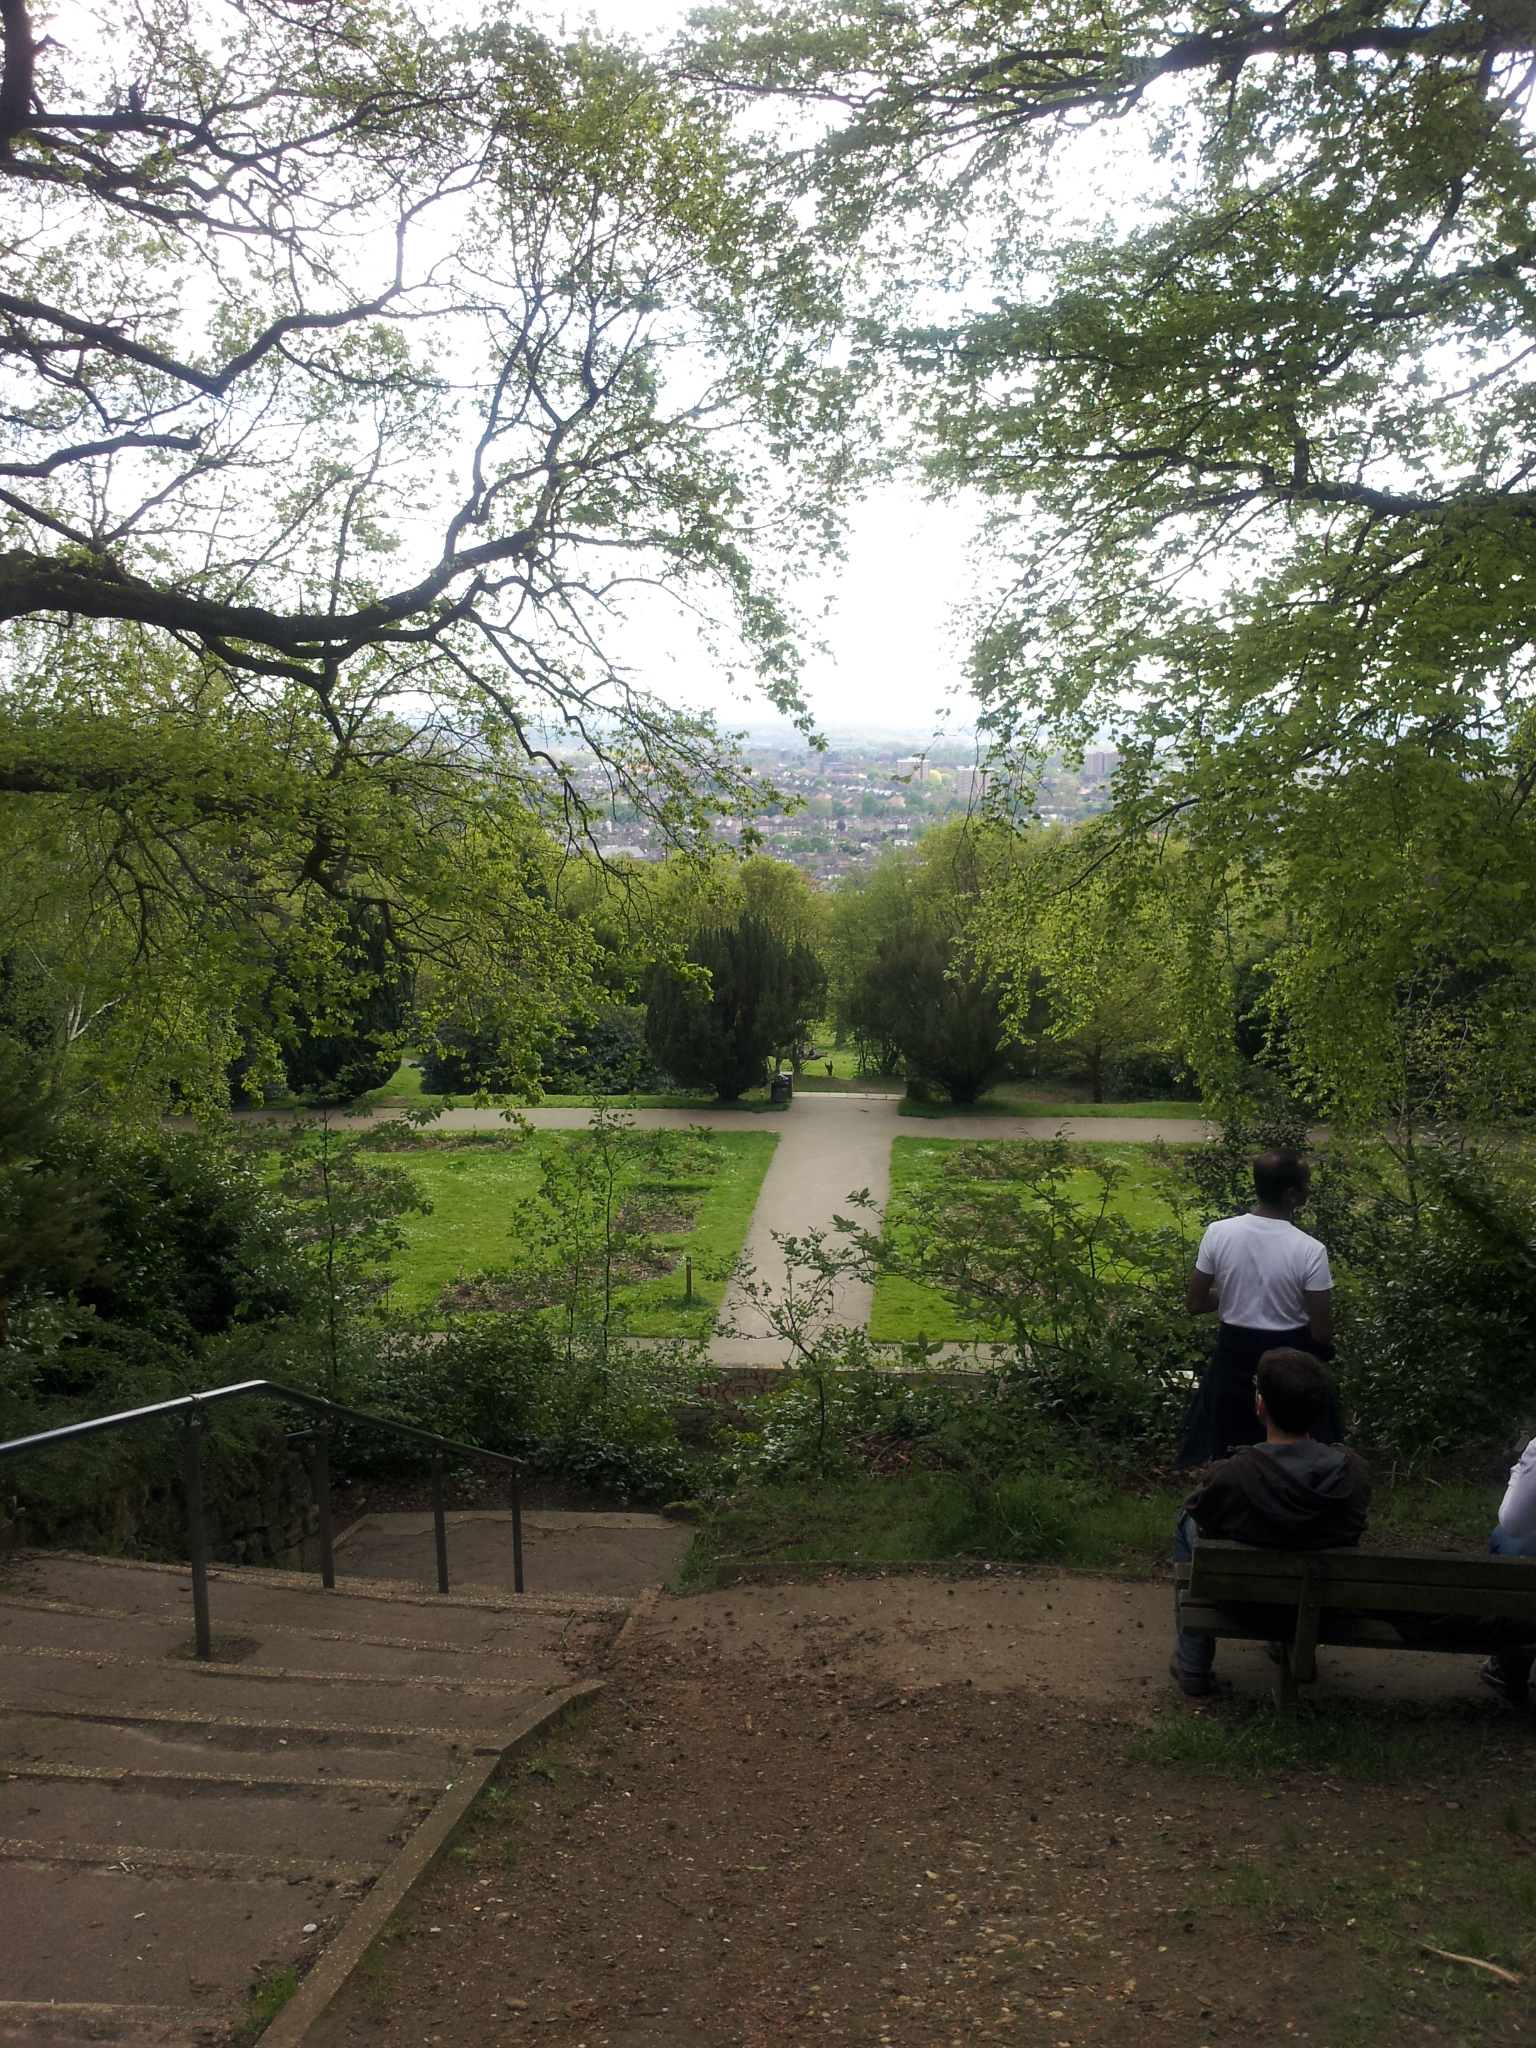 Walking London - View from Severndroog Castle